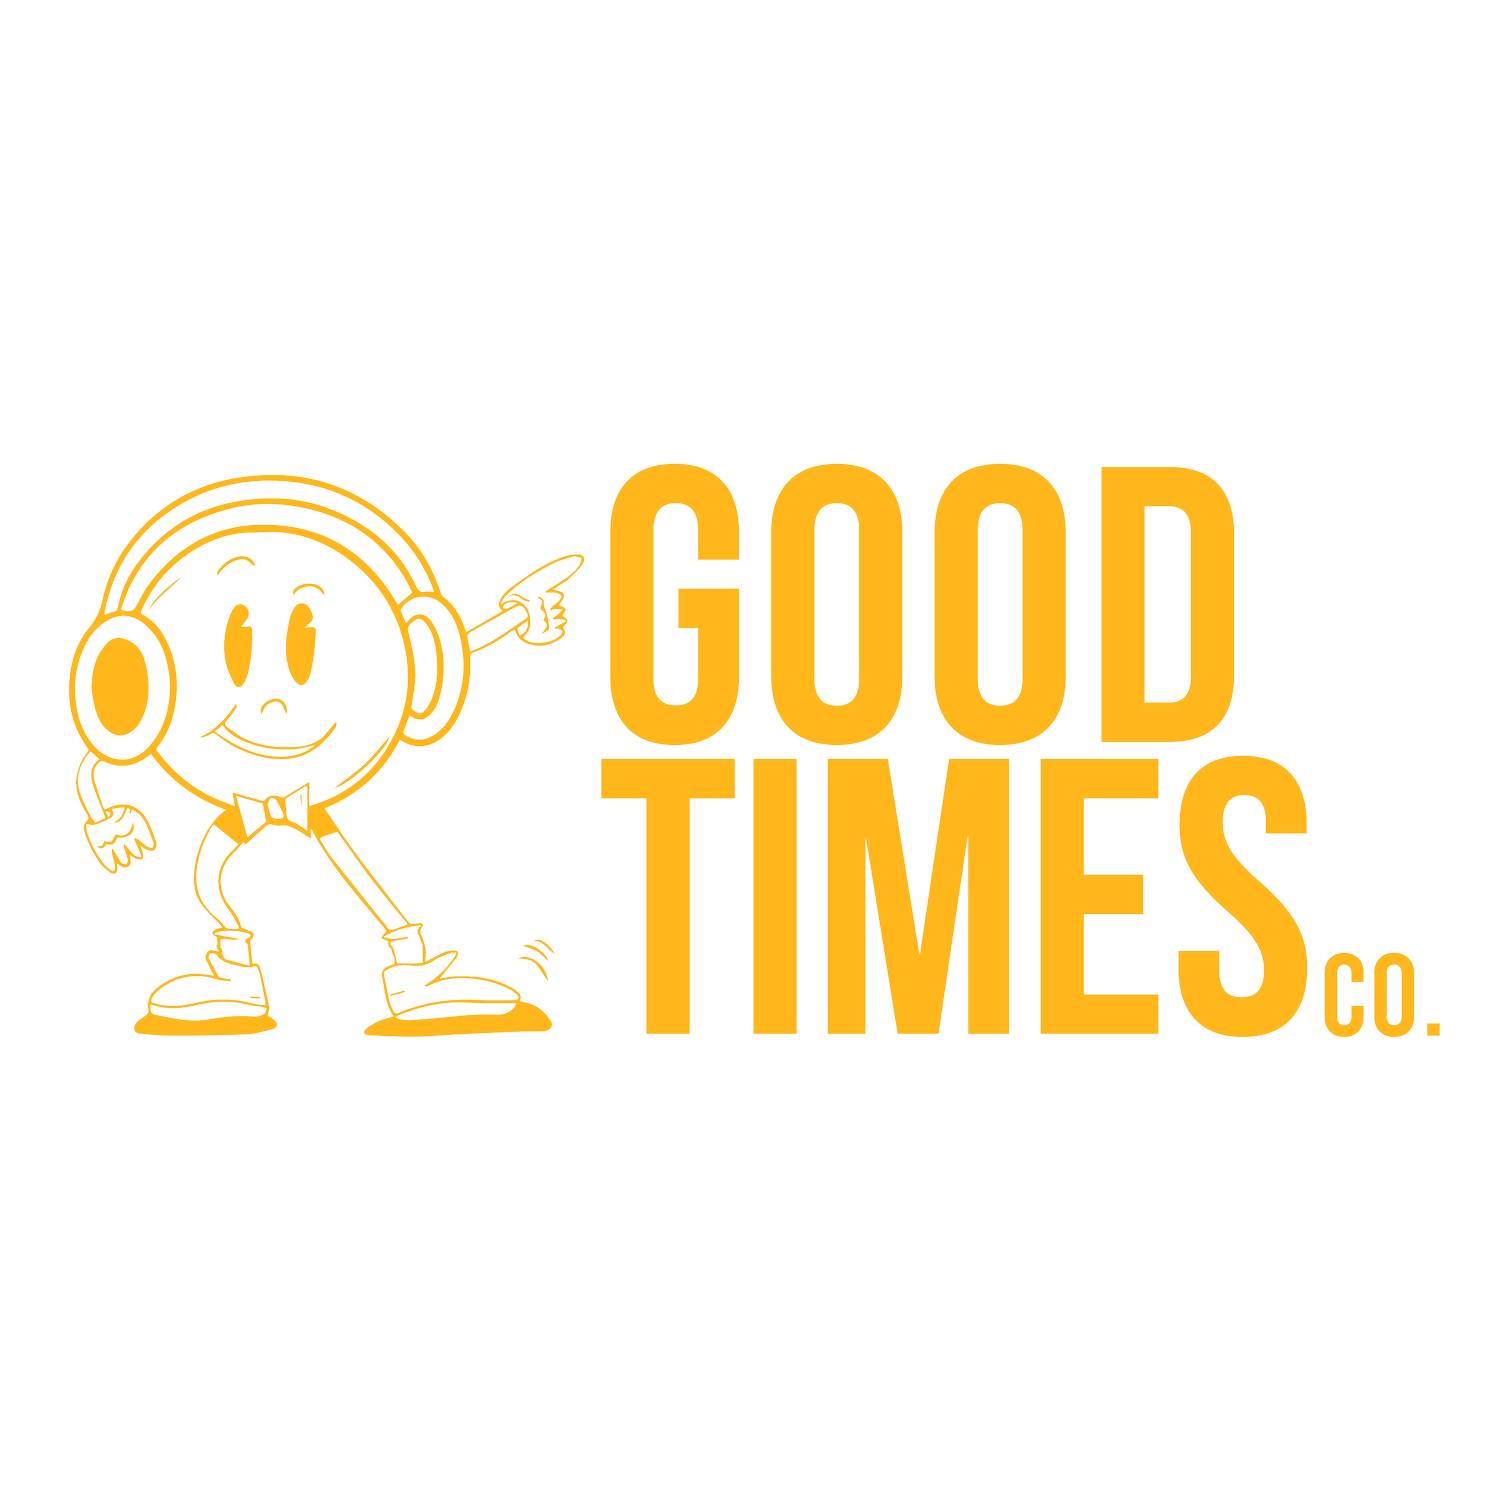 The Good Times Co